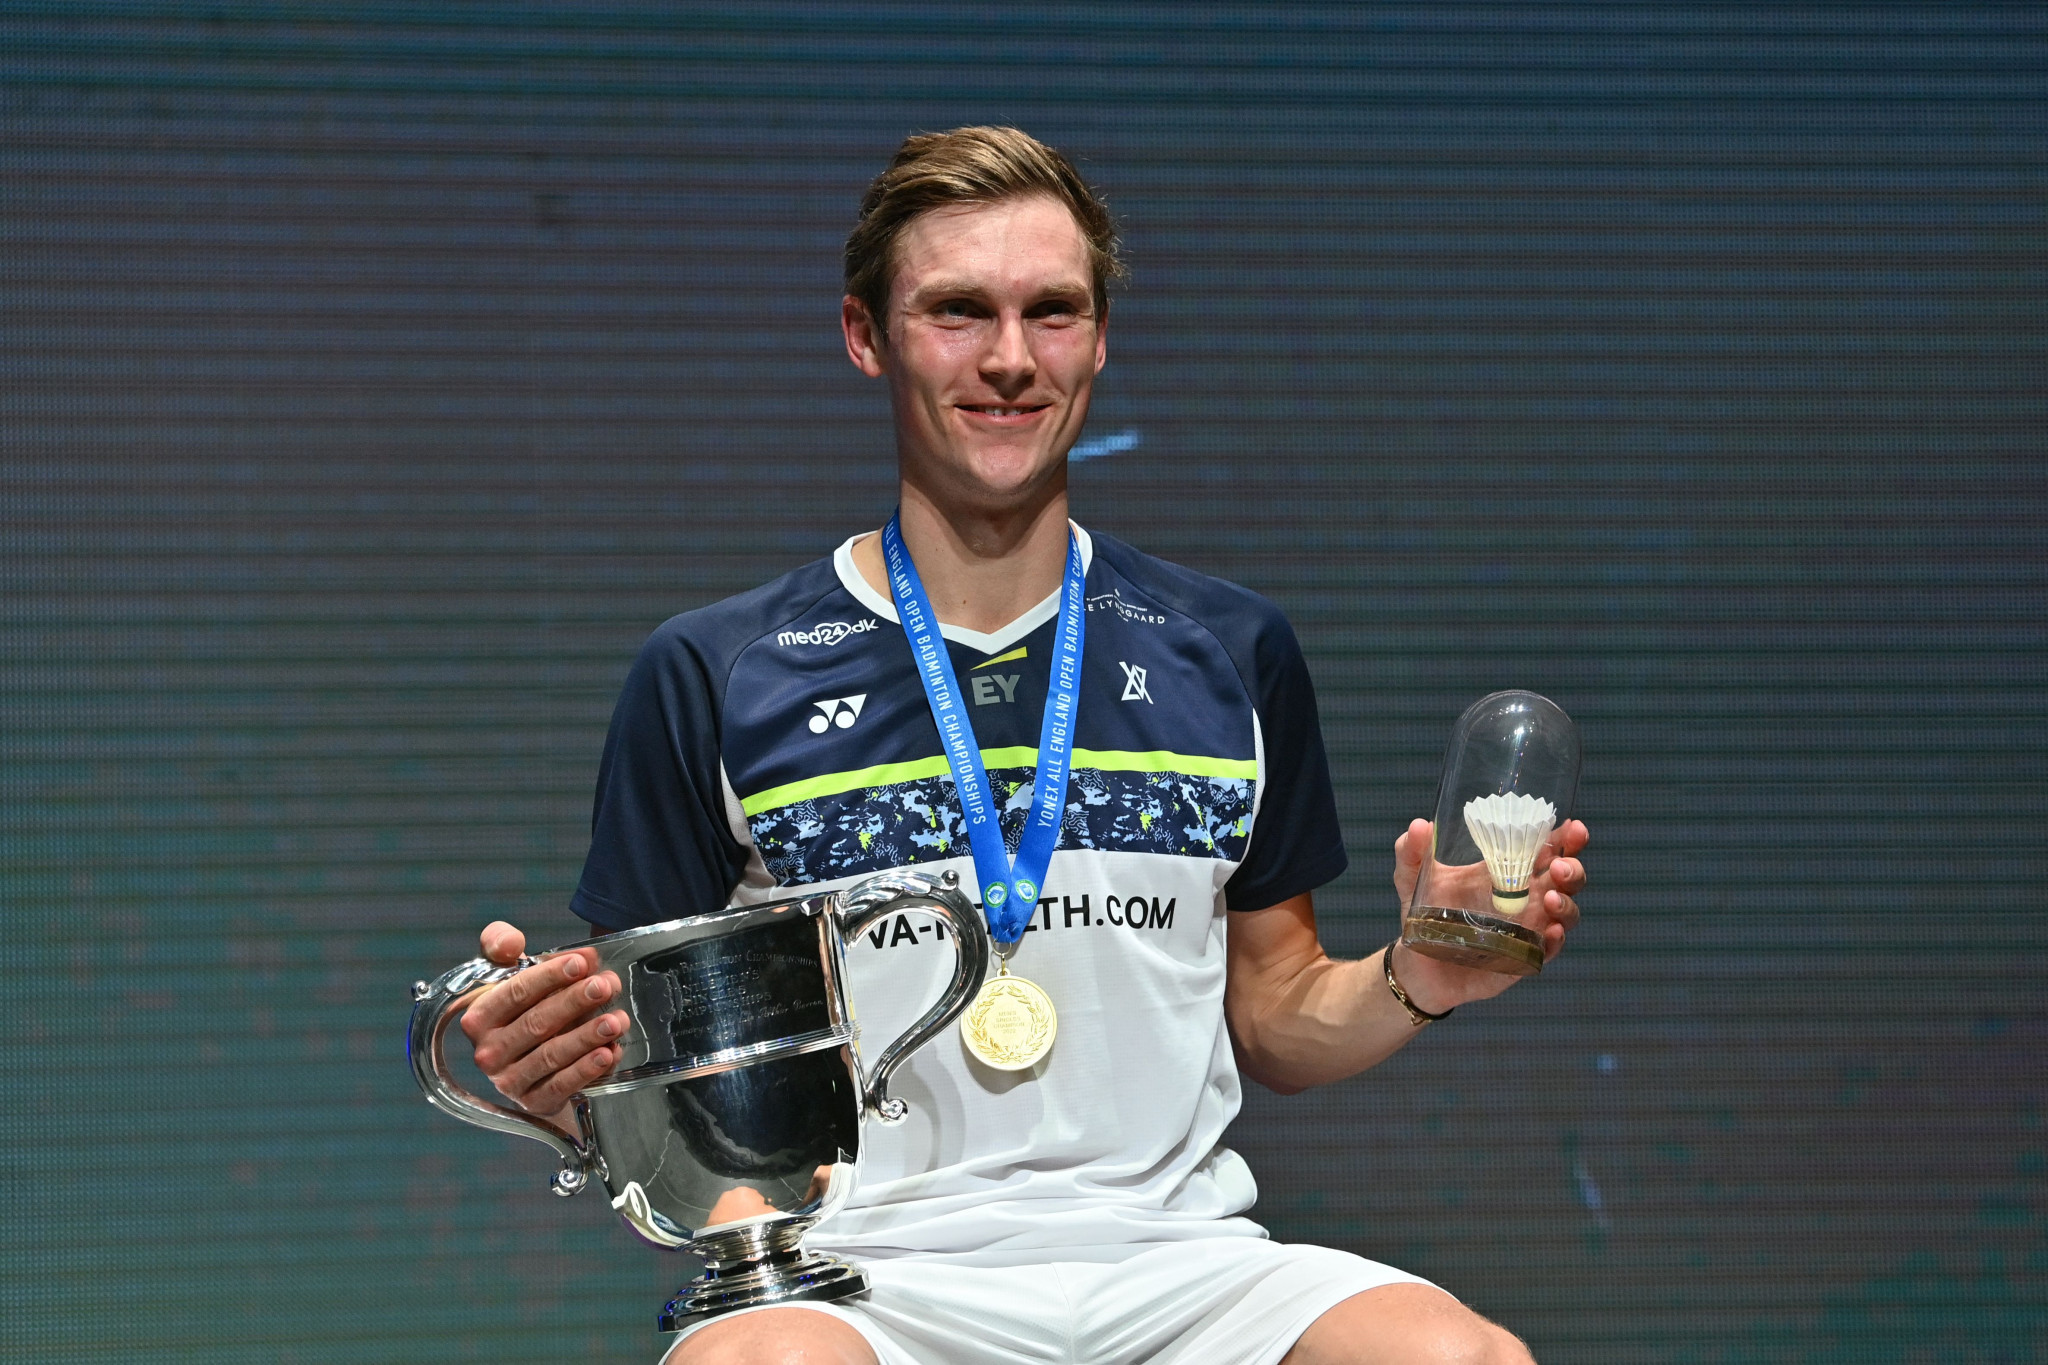 Viktor Axelsen earned his second All England Open Badminton Championships title ©Getty Images